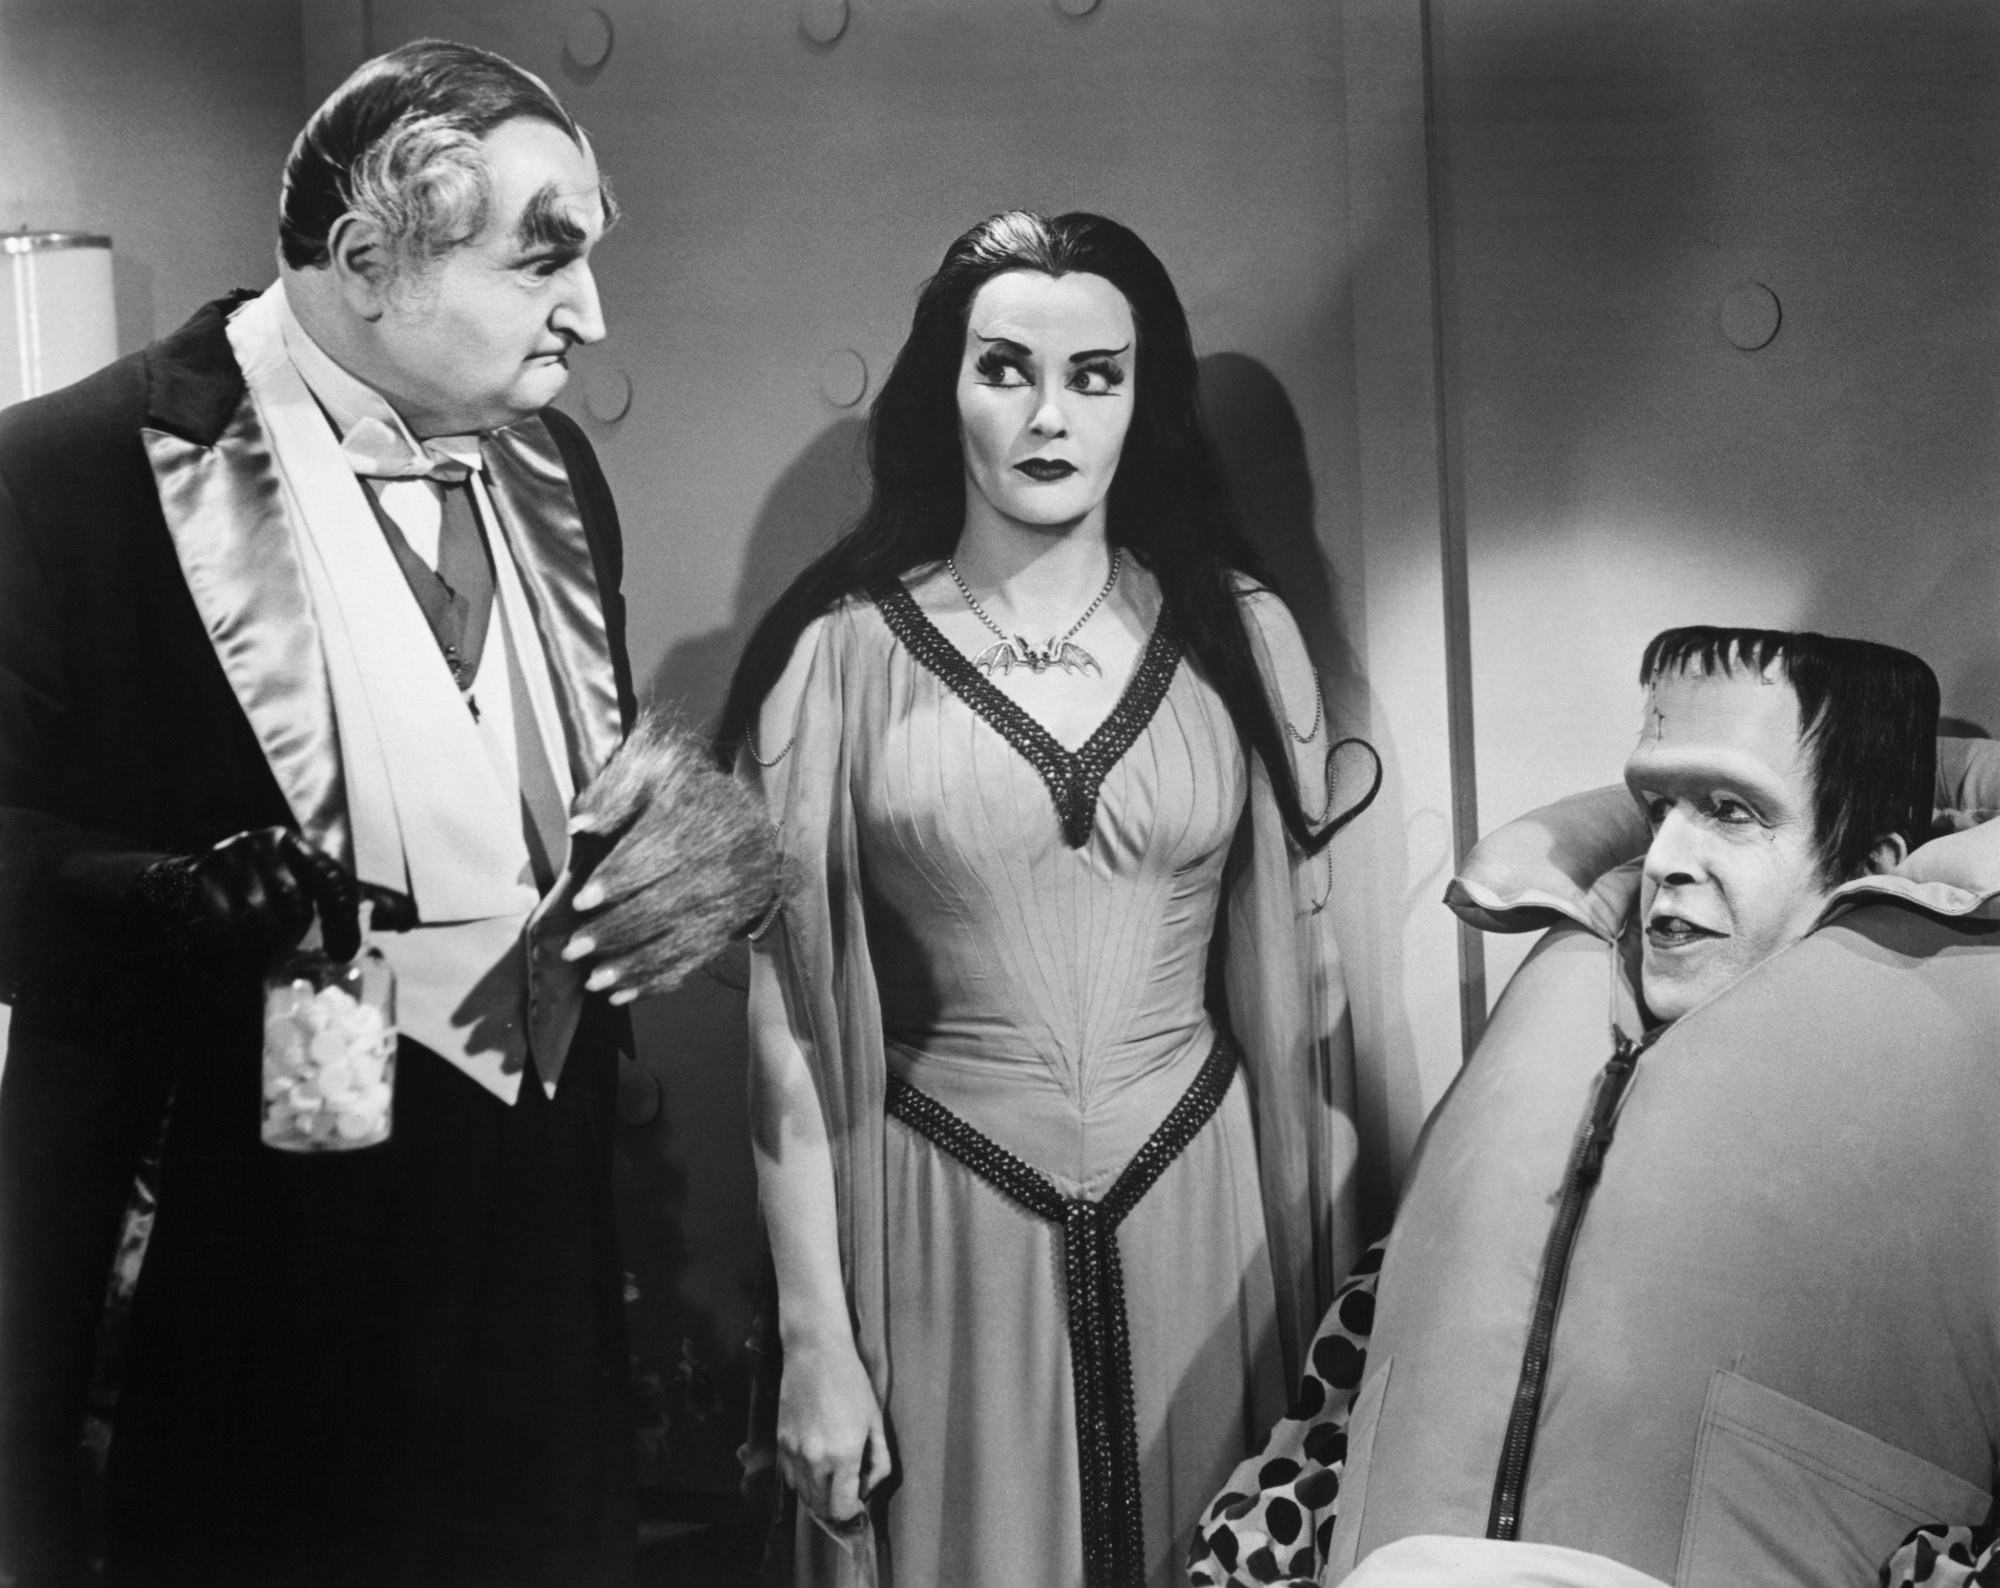 'The Munsters' Al Lewis as The Count, Yvonne De Carlo as Lily, and Fred Gwynne as Herman before Rob Zombie's version with Lily eyeing the Count